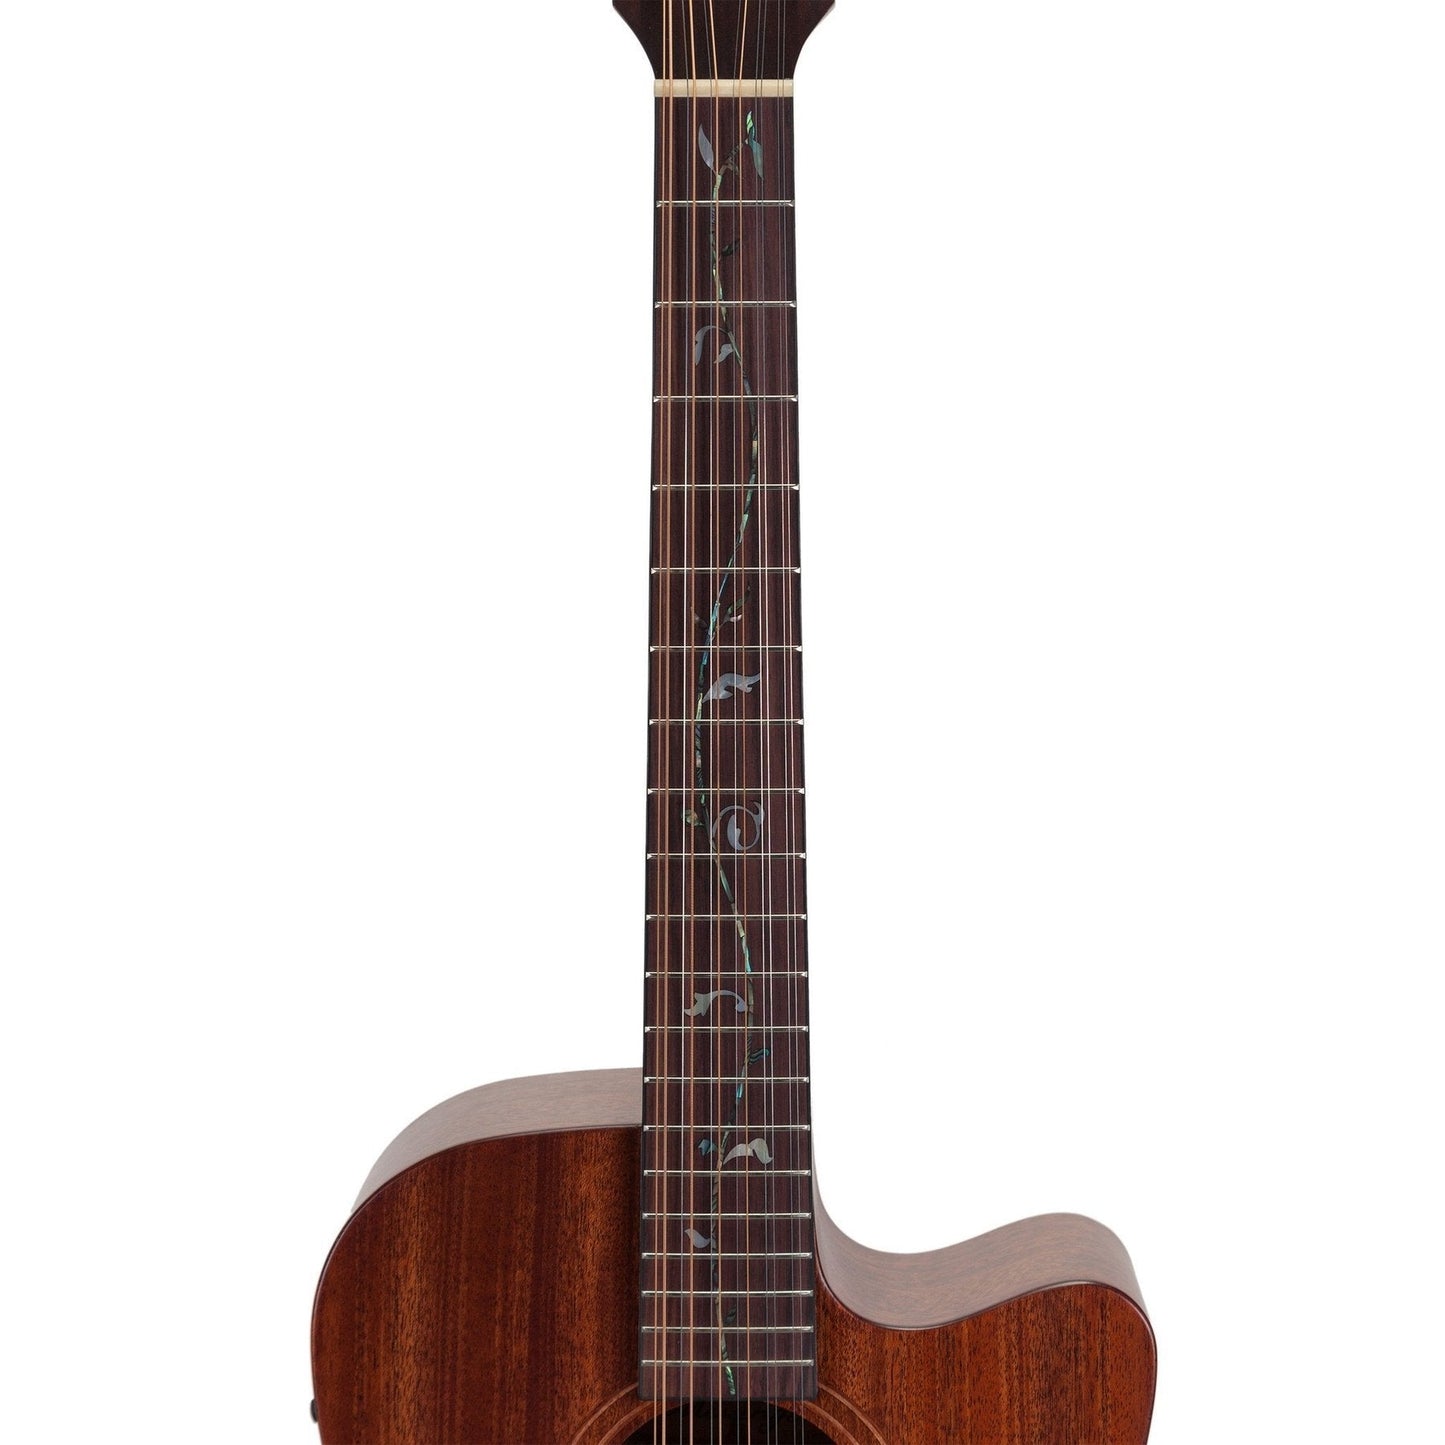 Timberidge 'Messenger Series' 12-String Mahogany Solid Top Acoustic-Electric Dreadnought Cutaway Guitar with 'Tree of Life' Inlay (Natural Satin)